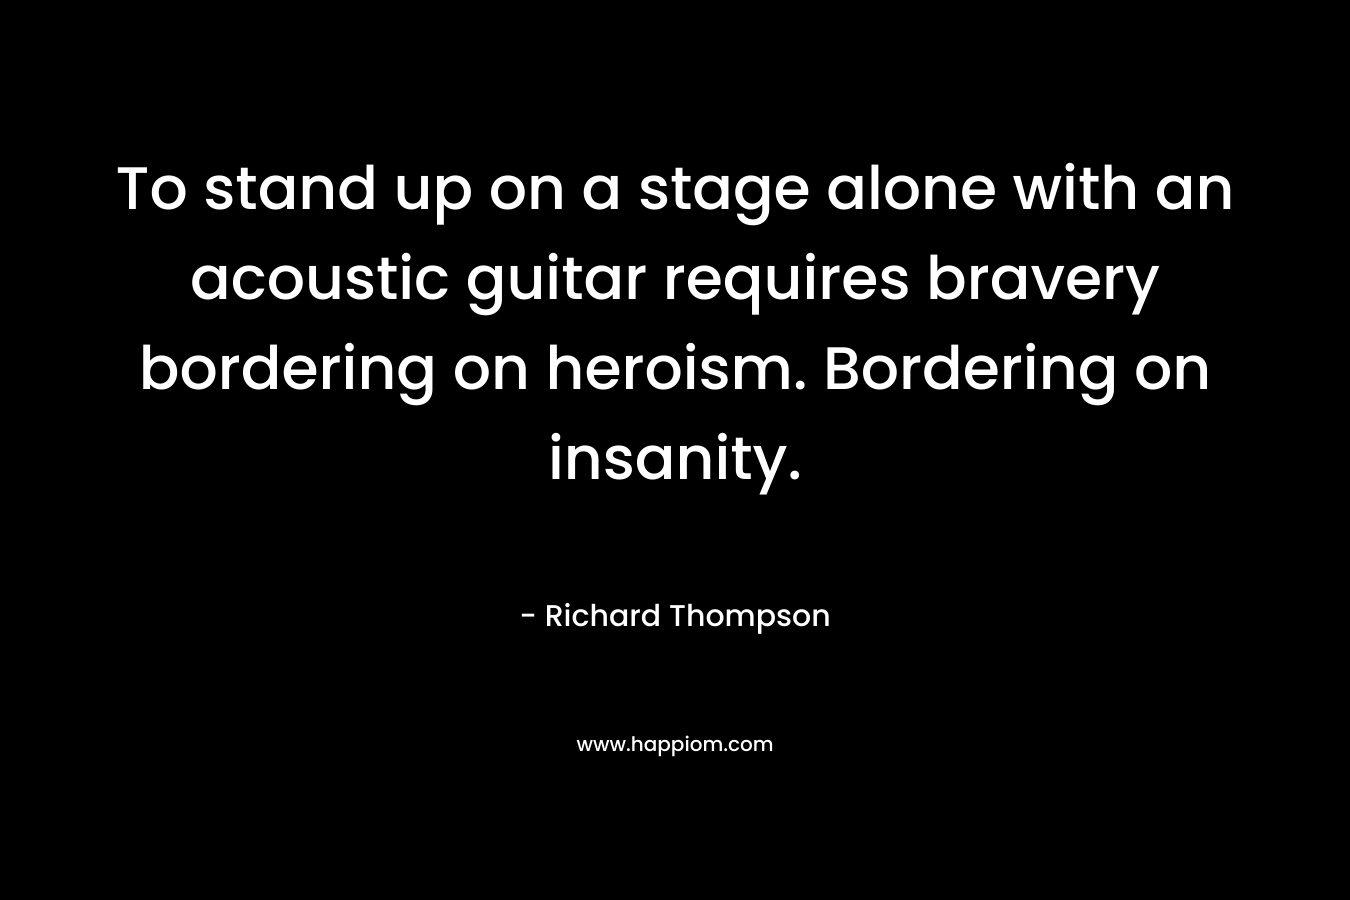 To stand up on a stage alone with an acoustic guitar requires bravery bordering on heroism. Bordering on insanity. – Richard Thompson